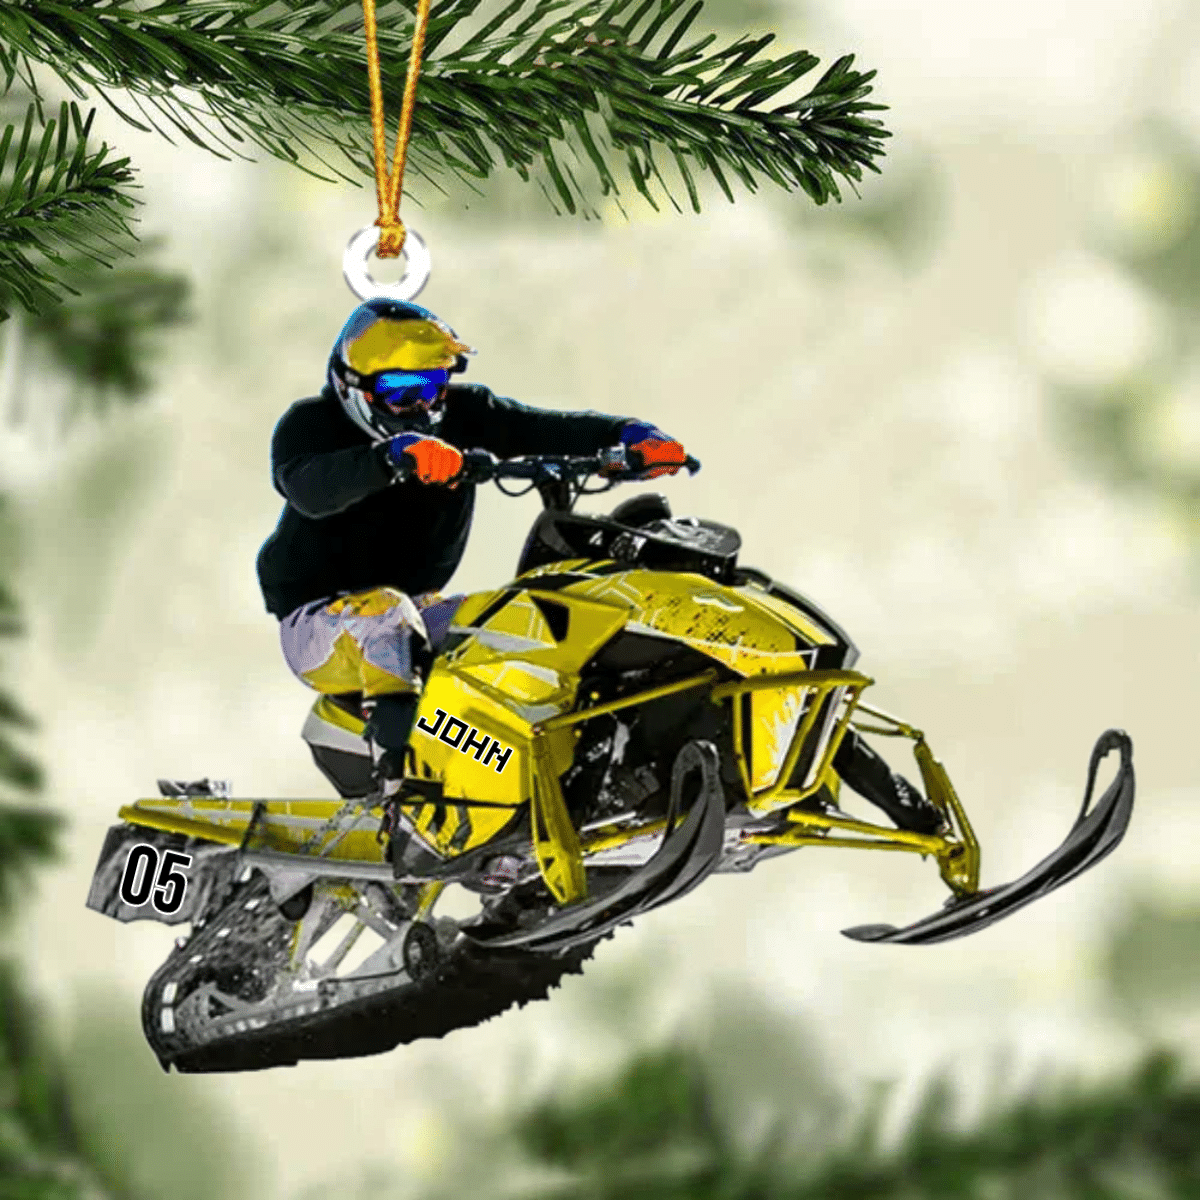 Personalized Snowmobile Rider Jumping Through Snow Christmas Ornament/ Snowmobile Flat Acrylic Ornament